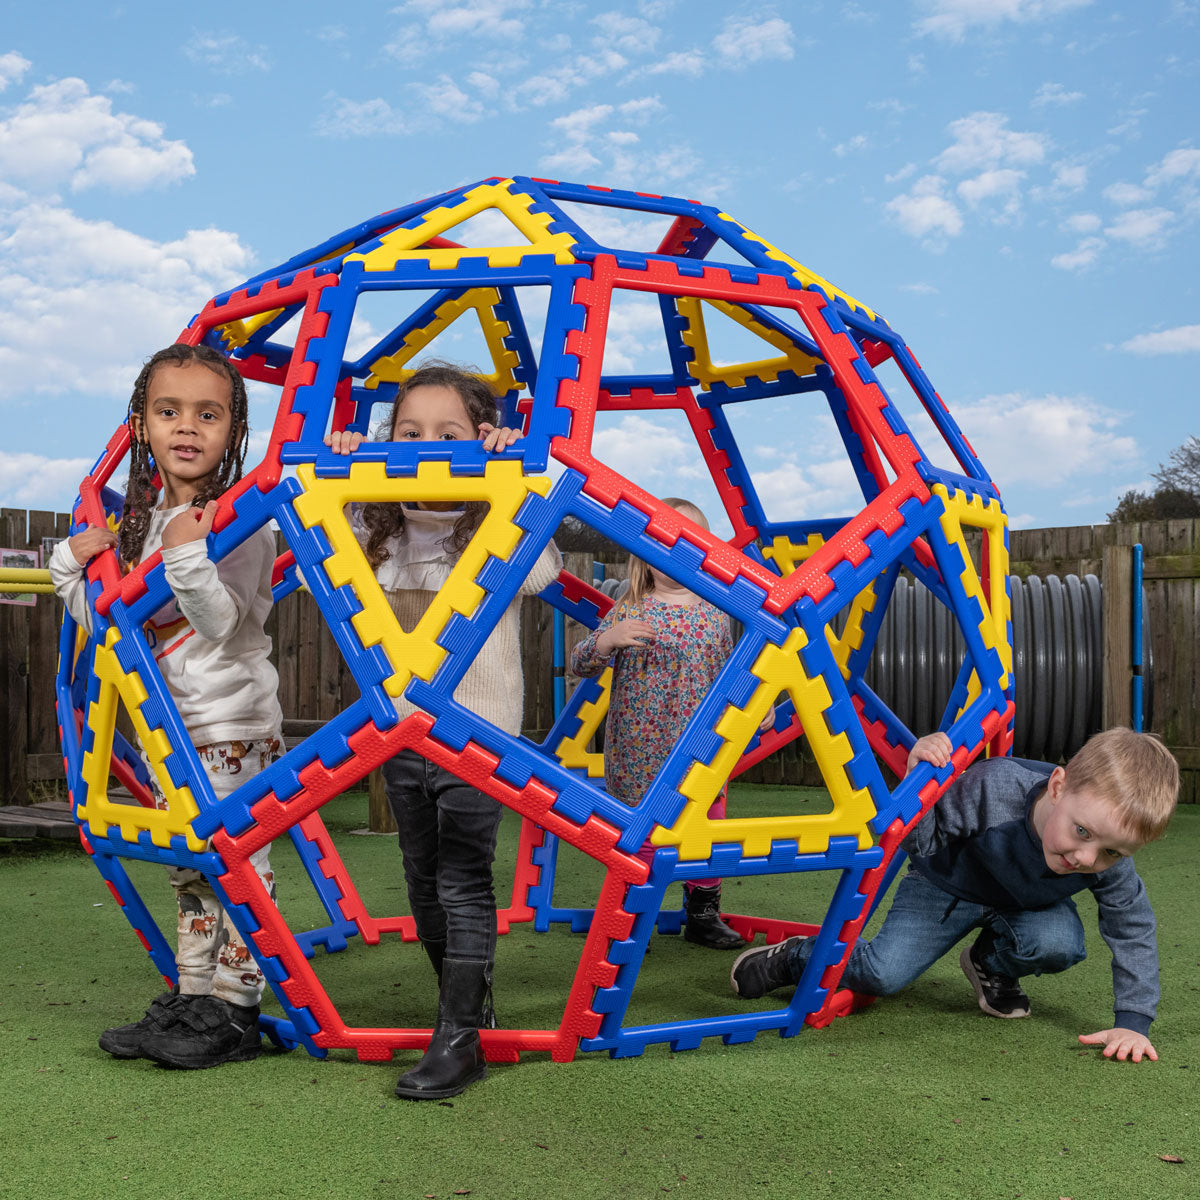 Polydron XL Geo Dome, Create a stunning dome, ball or a variety of different geometric shapes with this 62 piece multifunctional set. Children and adults can work in tandem to create giant shapes and constructions. Pieces are large and chunky, with the square measuring approximately 400mm. Explore geometry, construction and interactive play with this set. Children can also simply throw sheets over the dome to create a den! Each set contains 12 pentagons, 30 squares, 20 equilateral triangles and a guide. Pol